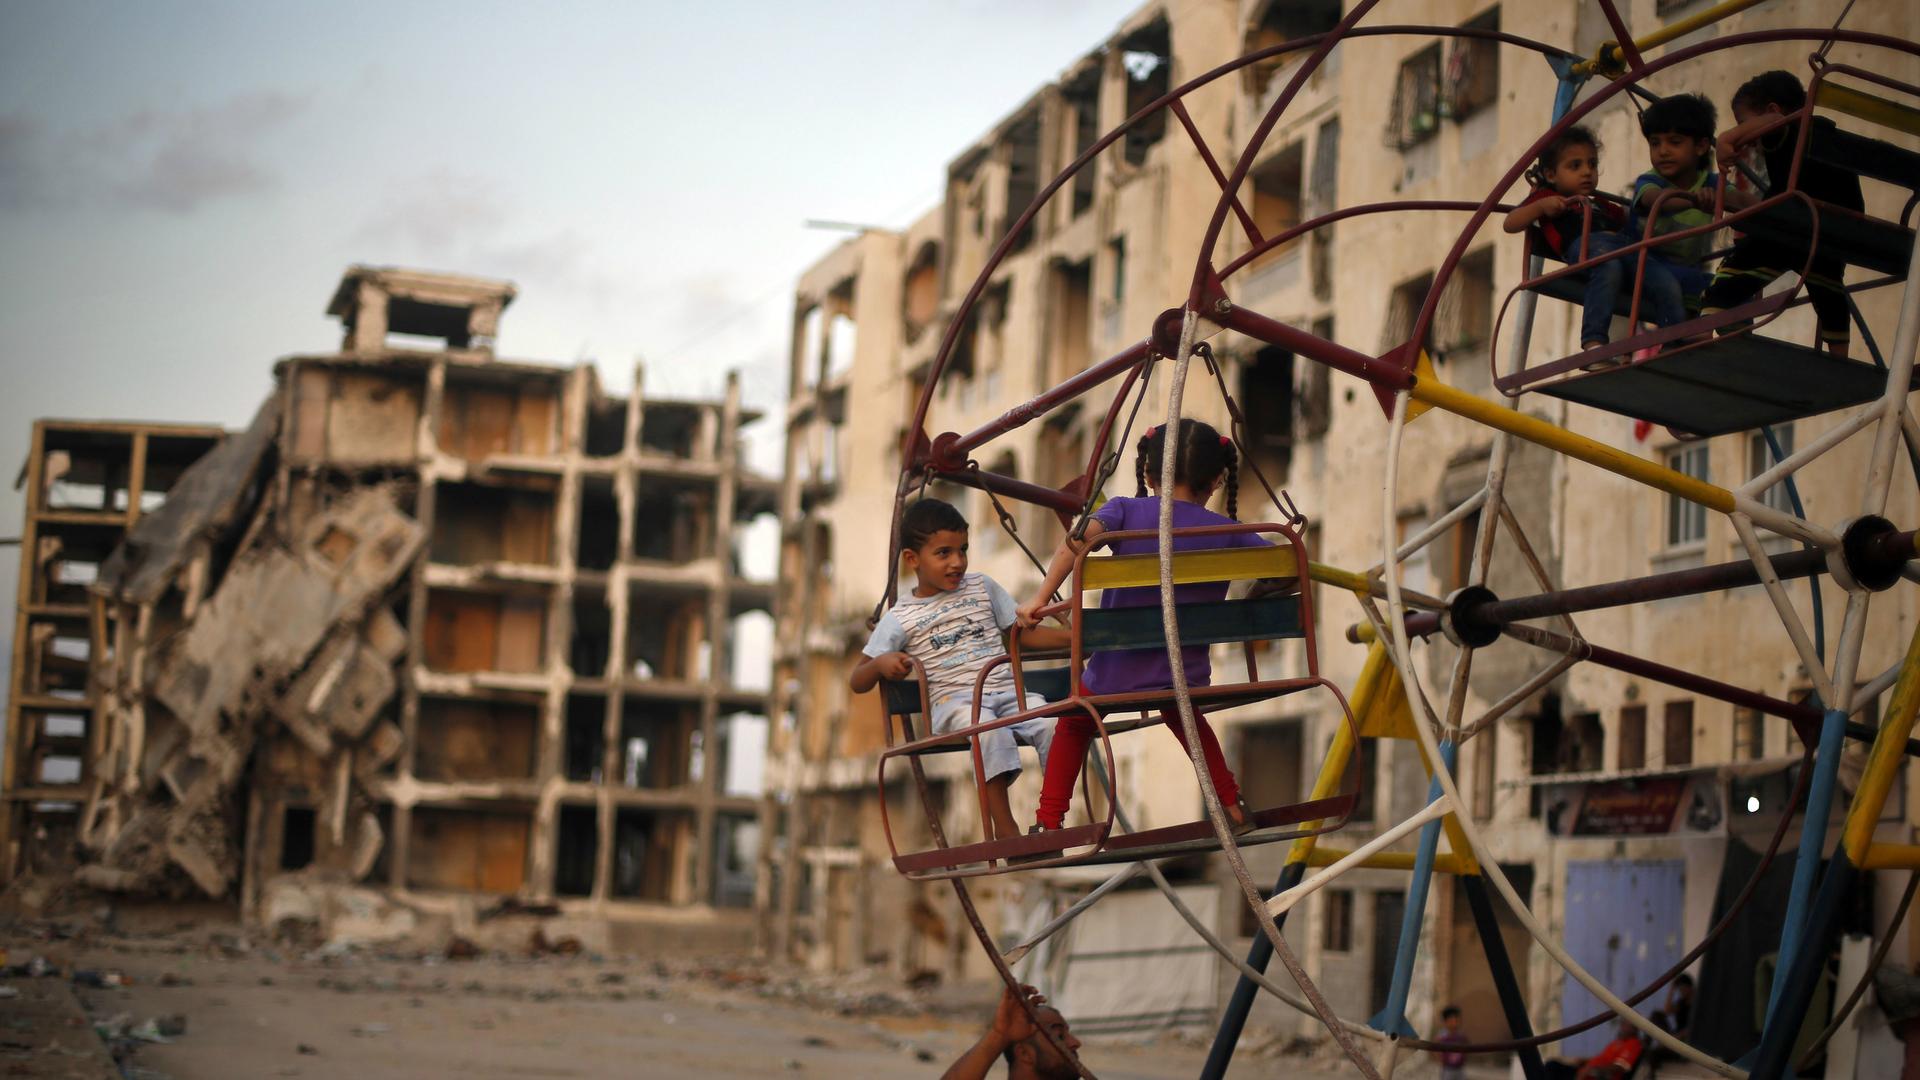 Palestinian children play on a ferris wheel near residential buildings that witnesses said were destroyed by Israeli shelling during a 50-day war in the summer of 2014, in Beit Lahiya town in the northern Gaza, July 27, 2015.